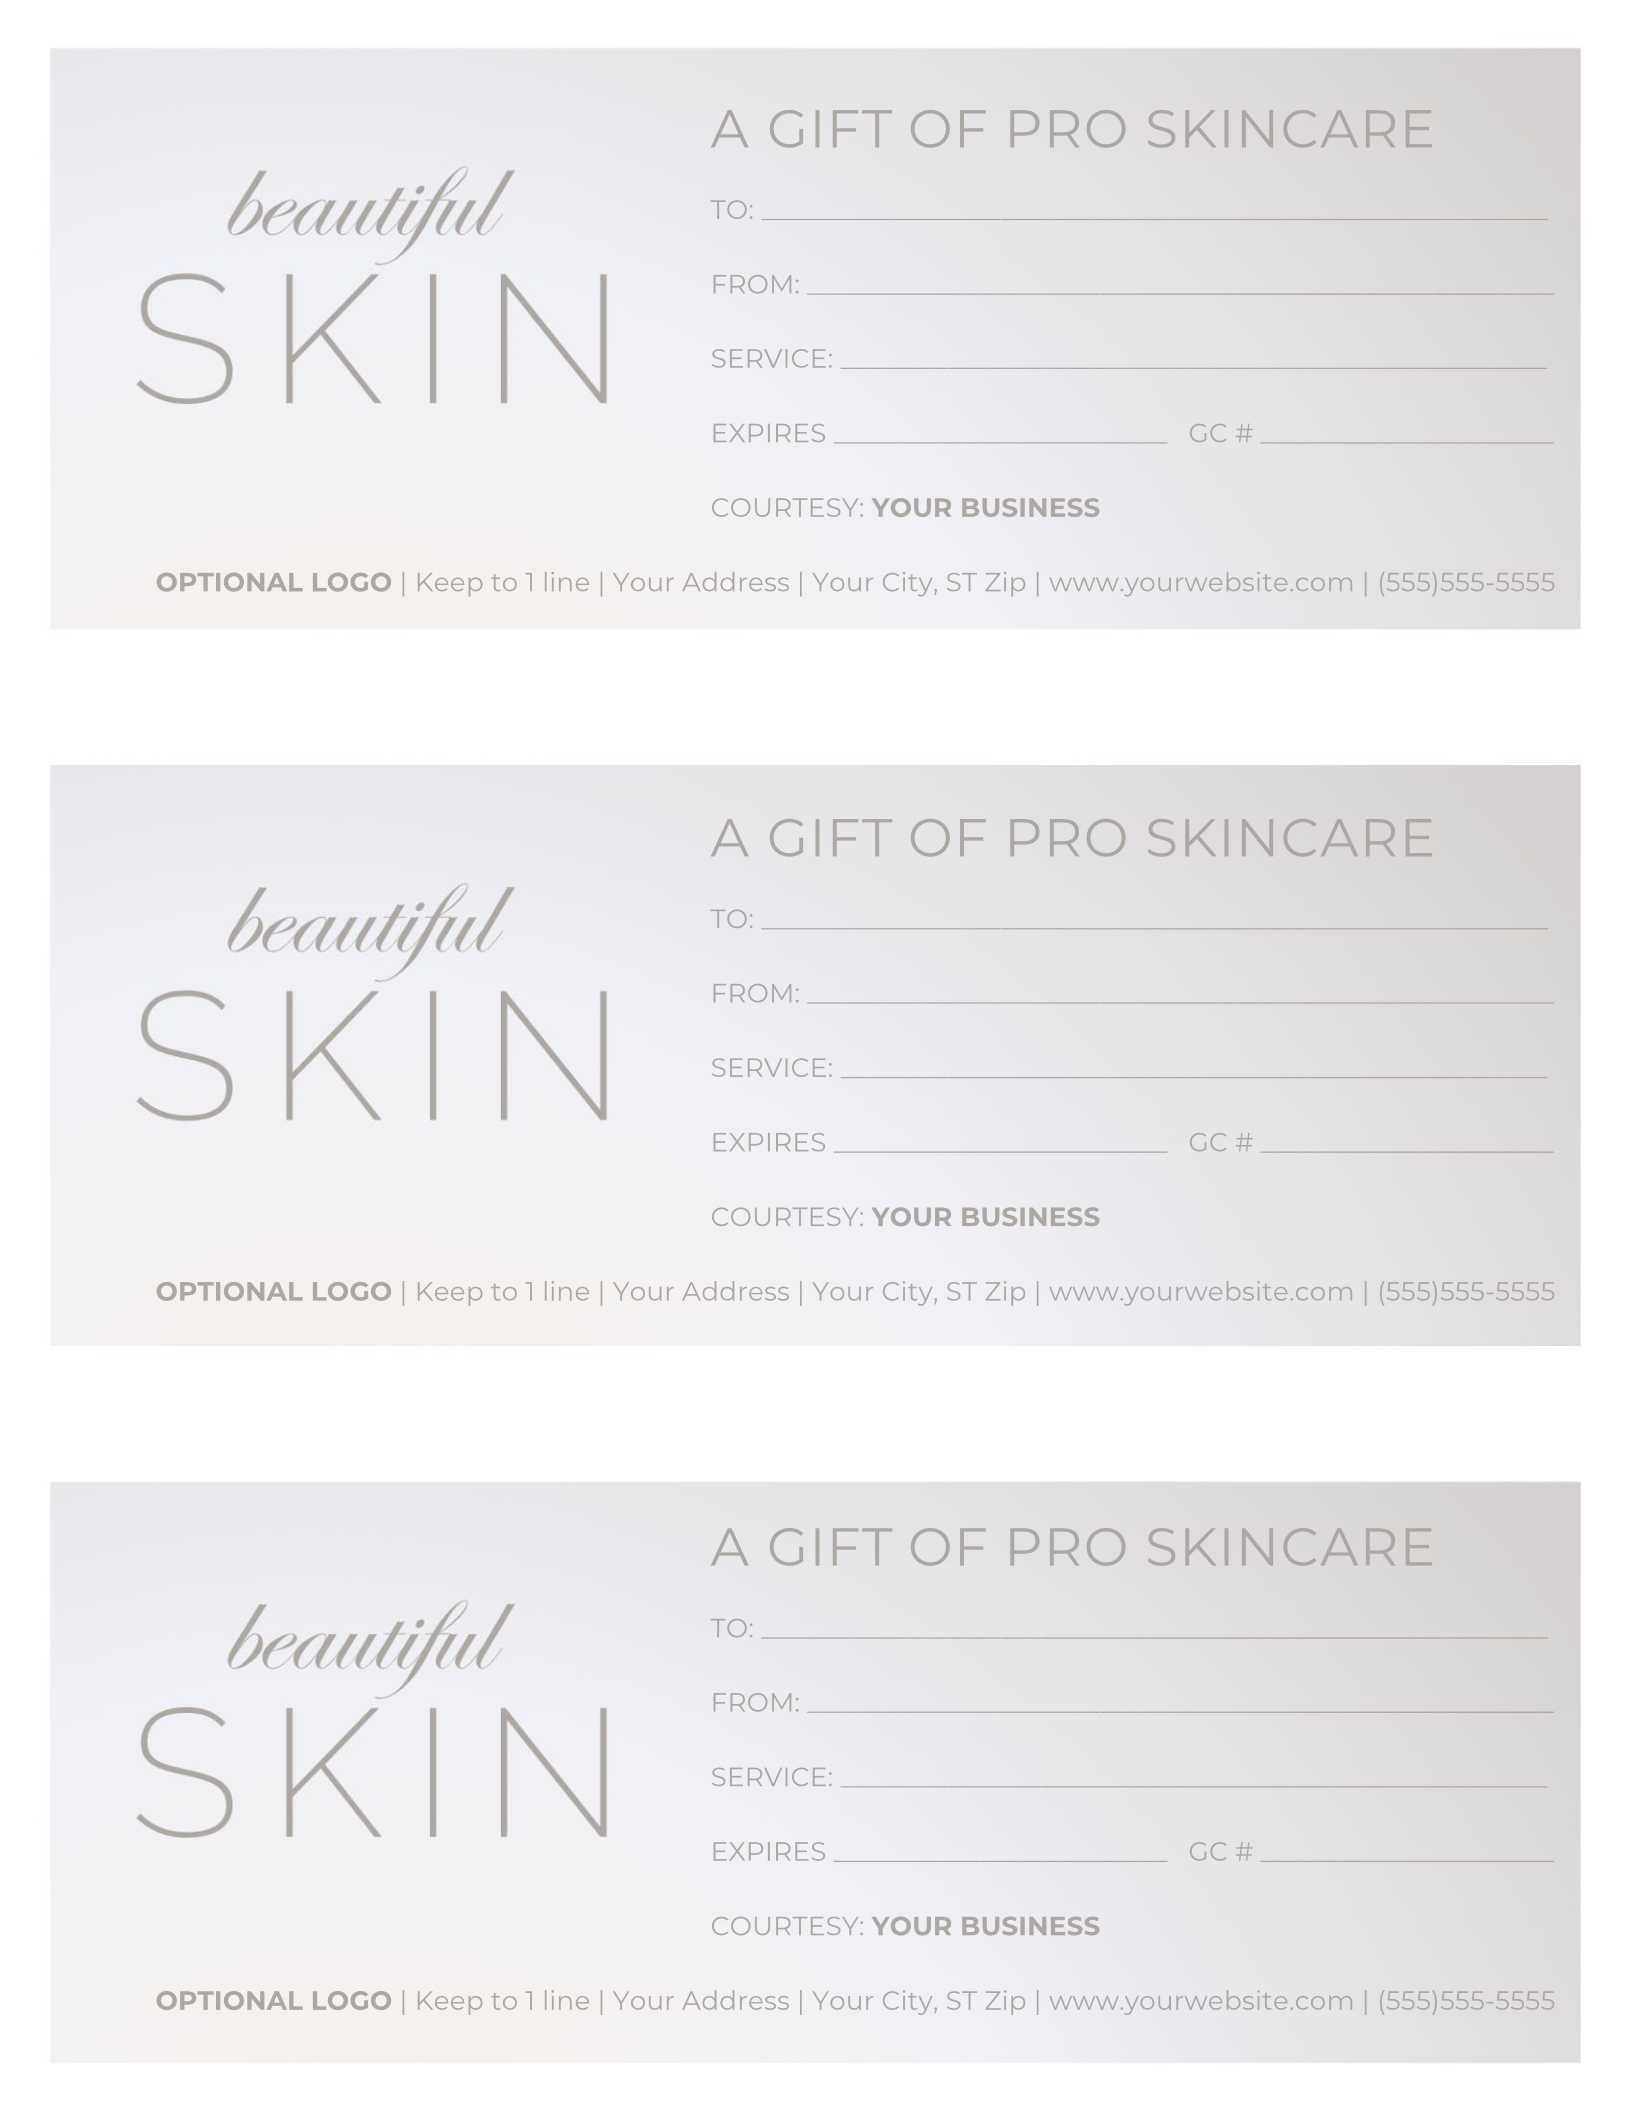 Free Gift Certificate Templates For Massage And Spa For Spa Day Gift Certificate Template